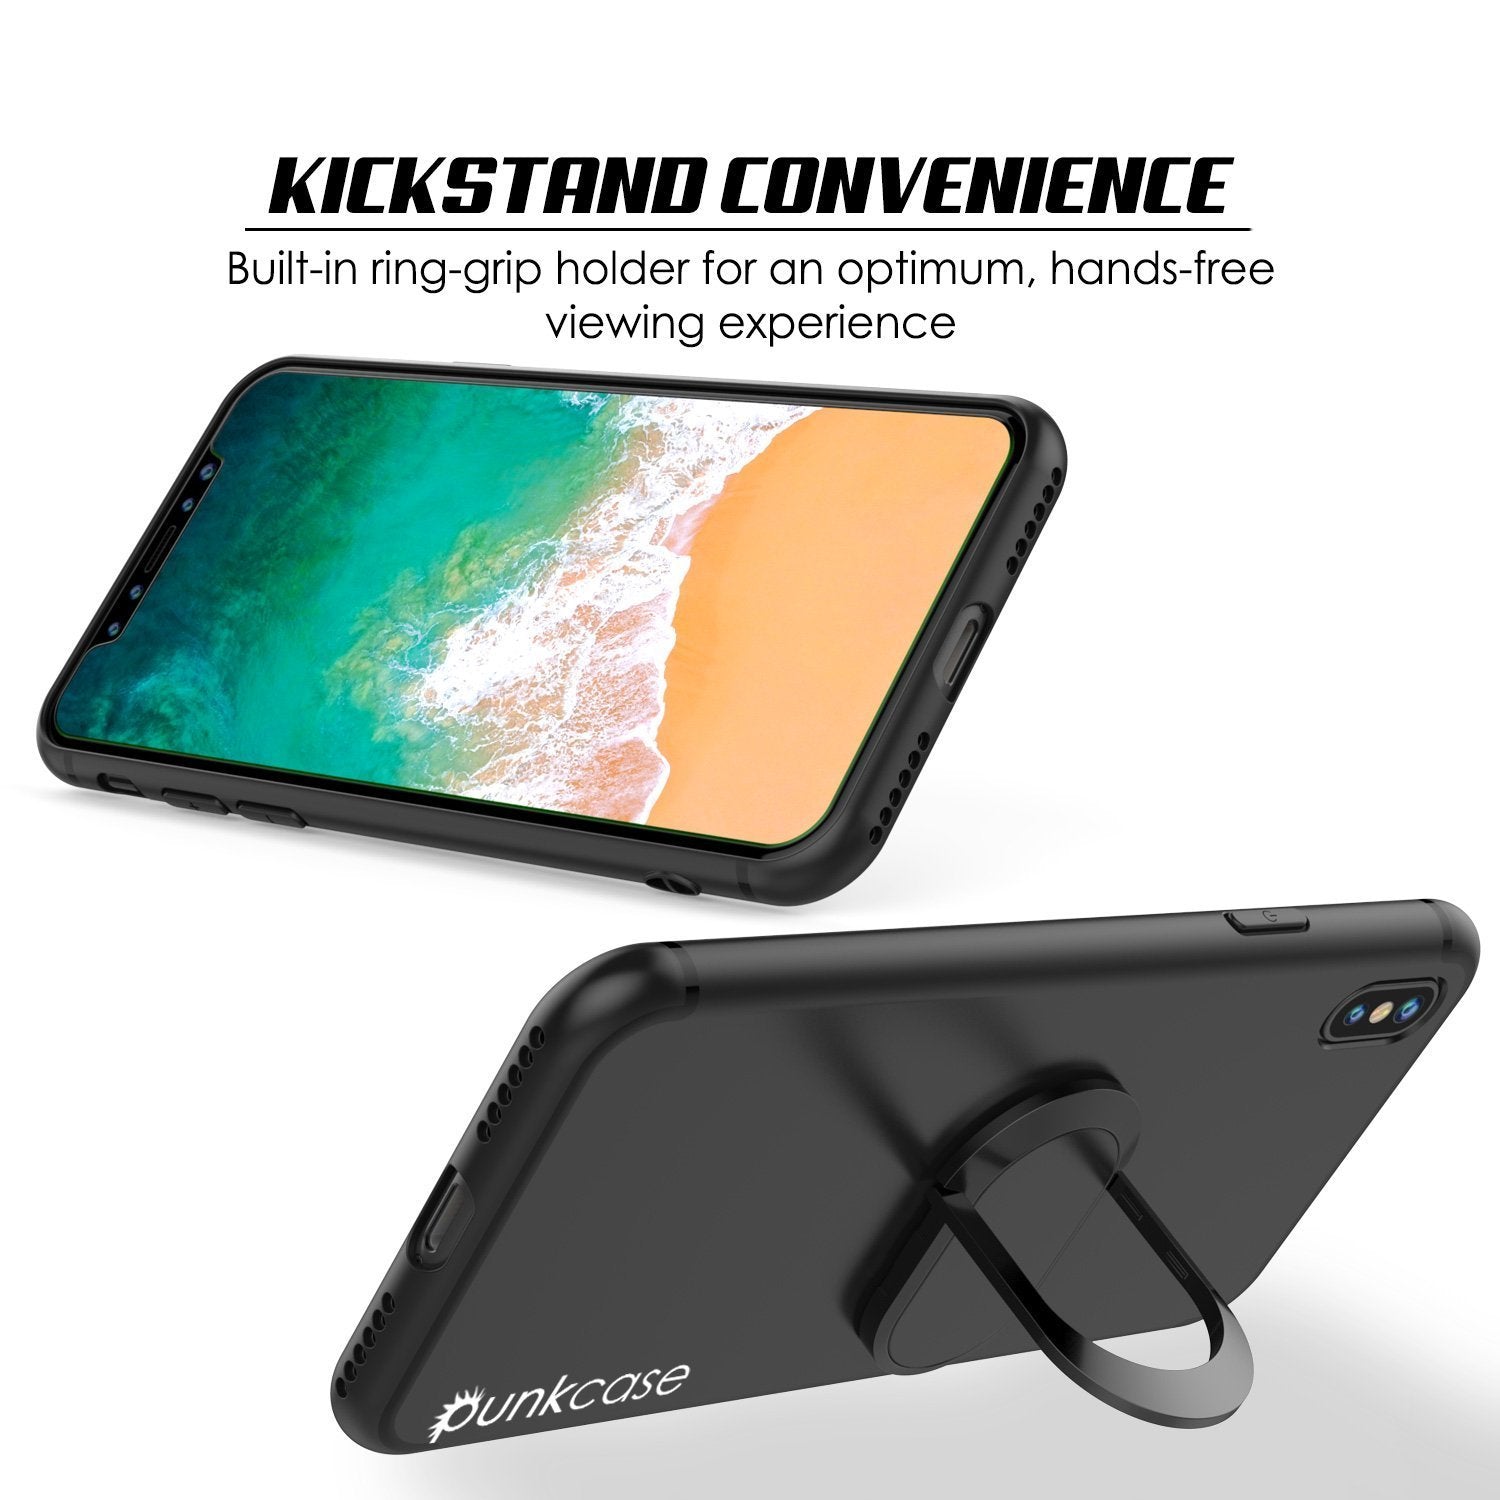 iPhone X Case, Punkcase Magnetix Protective TPU Cover W/ Kickstand, Tempered Glass Screen Protector [Black] - PunkCase NZ